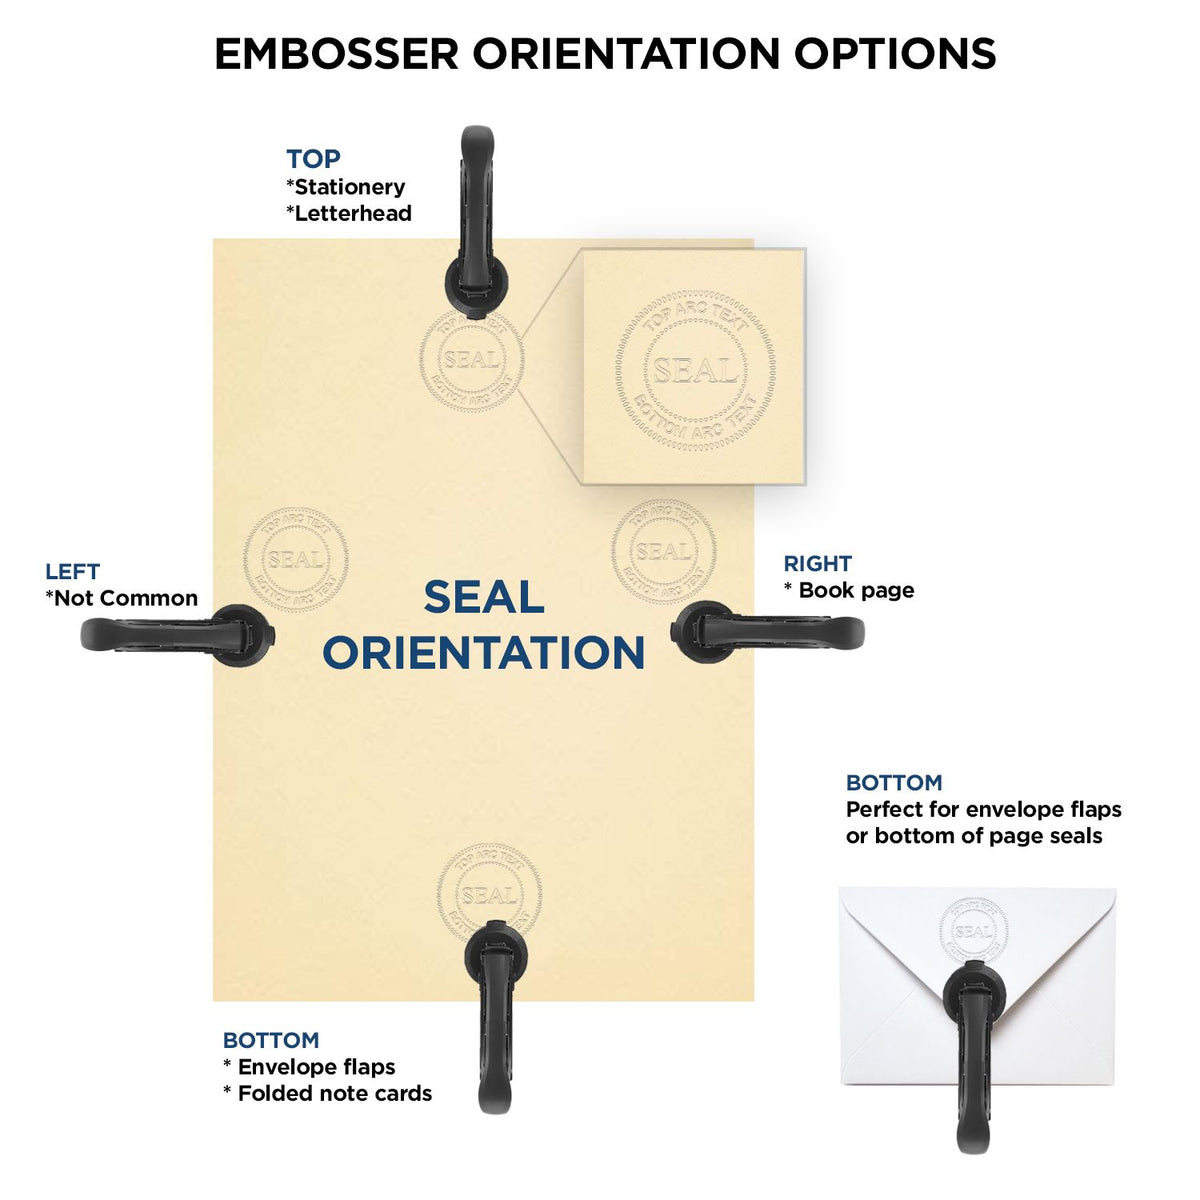 An infographic for the Handheld Virginia Professional Geologist Embosser showing embosser orientation, this is showing examples of a top, bottom, right and left insert.